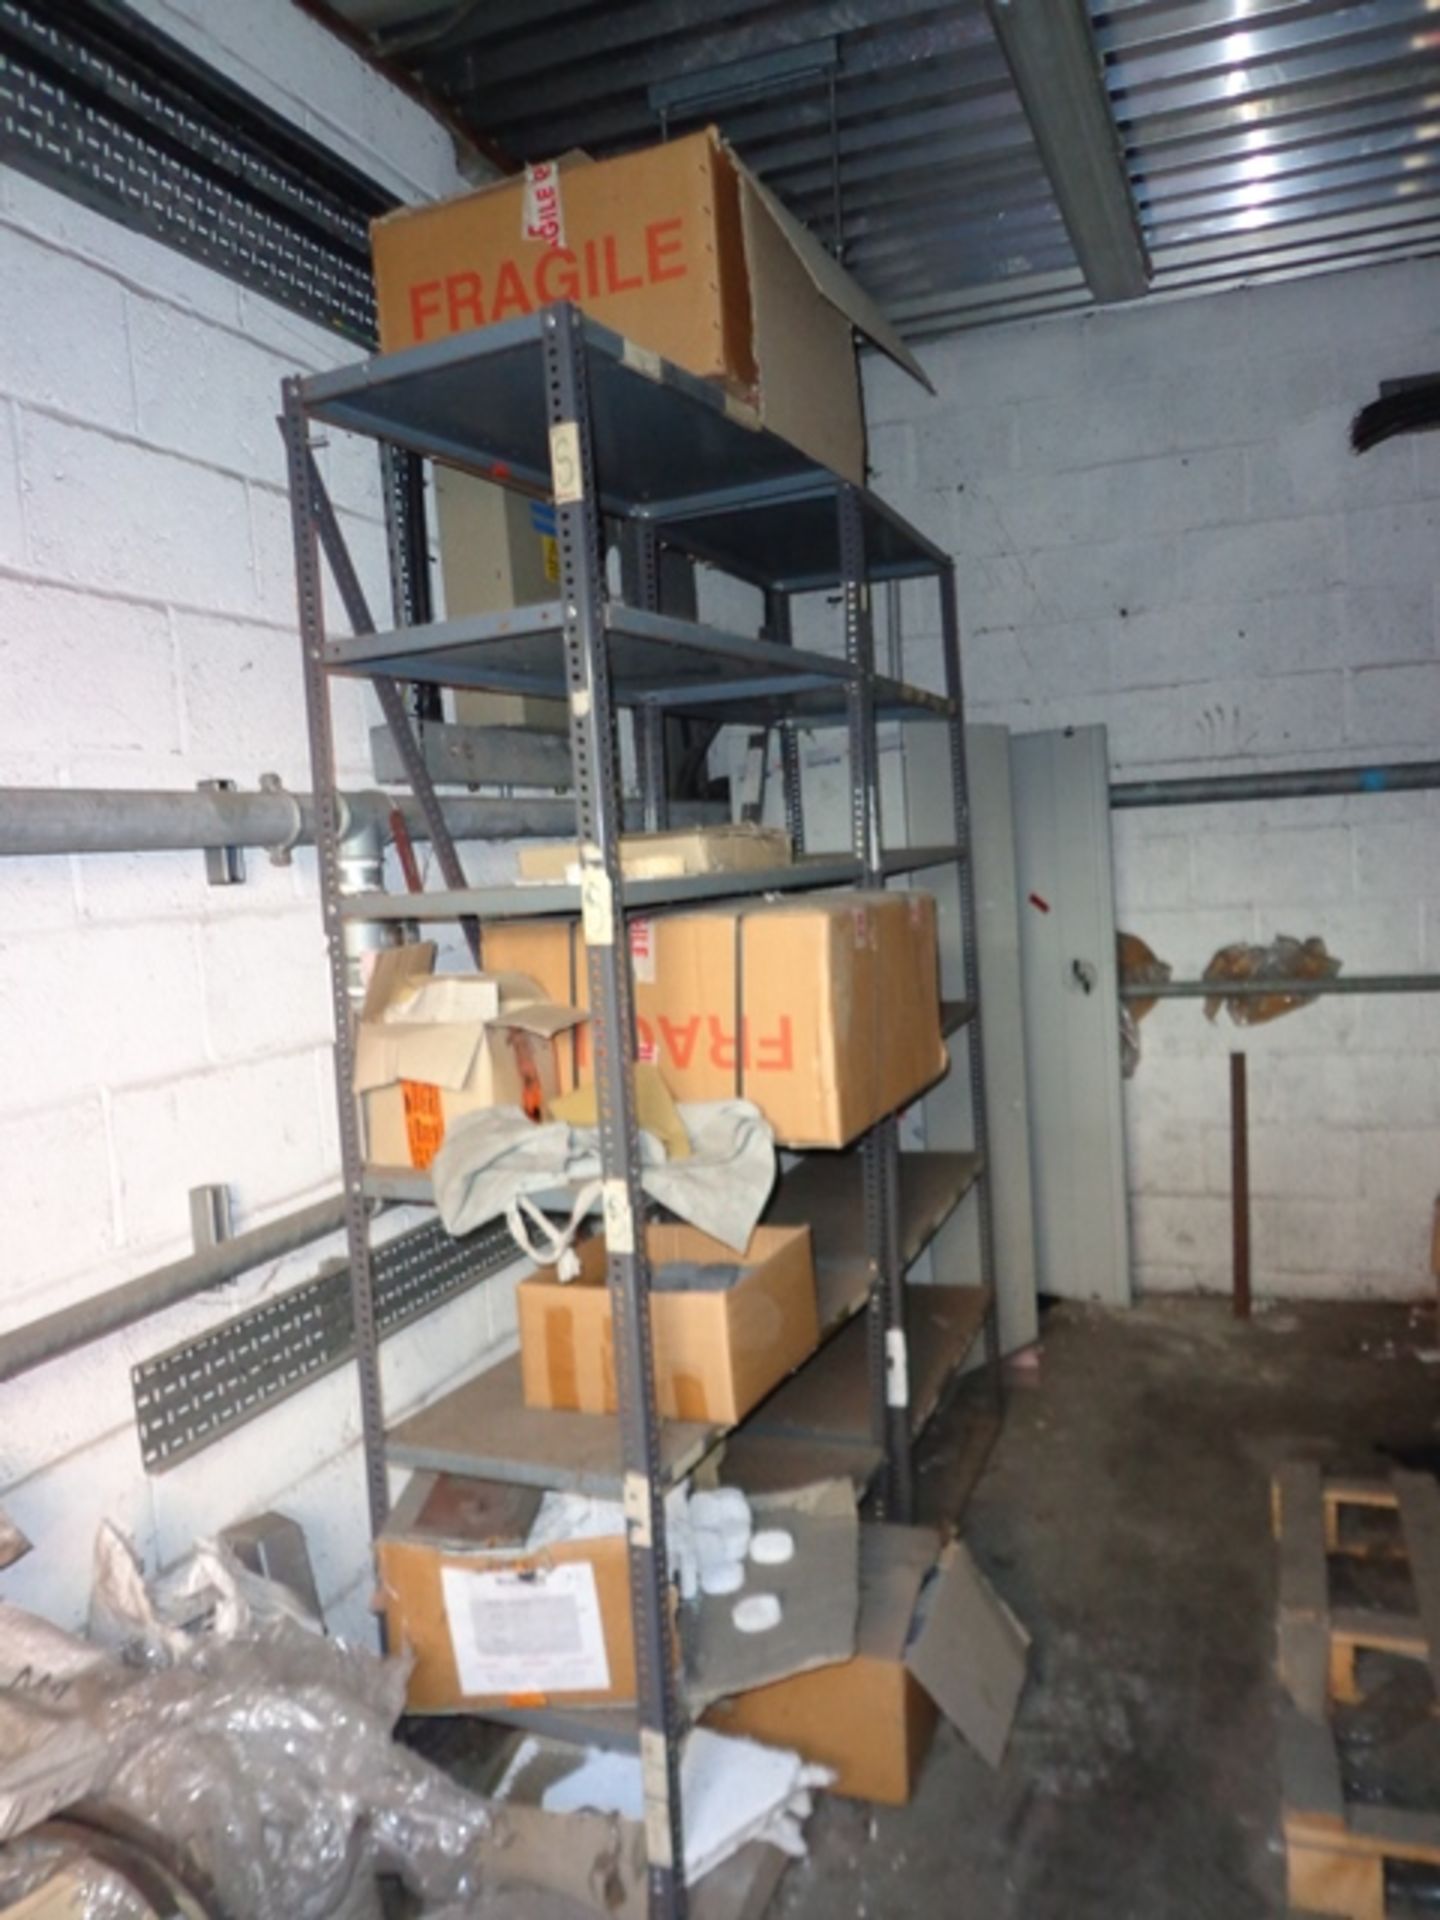 Contents to Room inc Two Bays of Metal Shelving, Double Door Cupboard, Foundry Ceramics